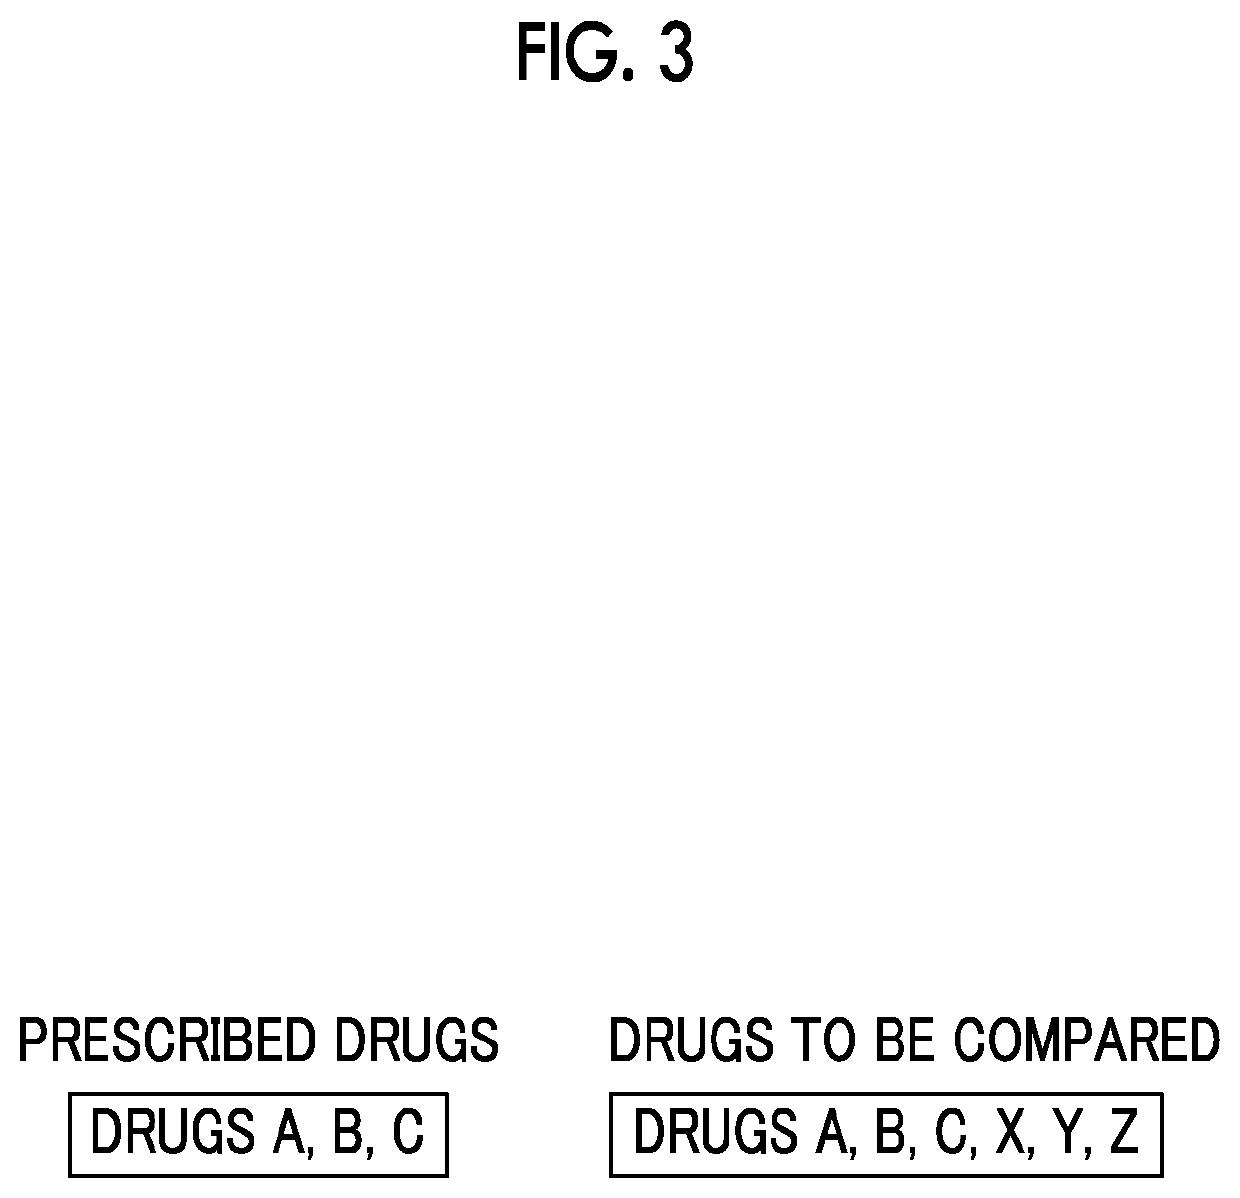 Drug inspection apparatus and method